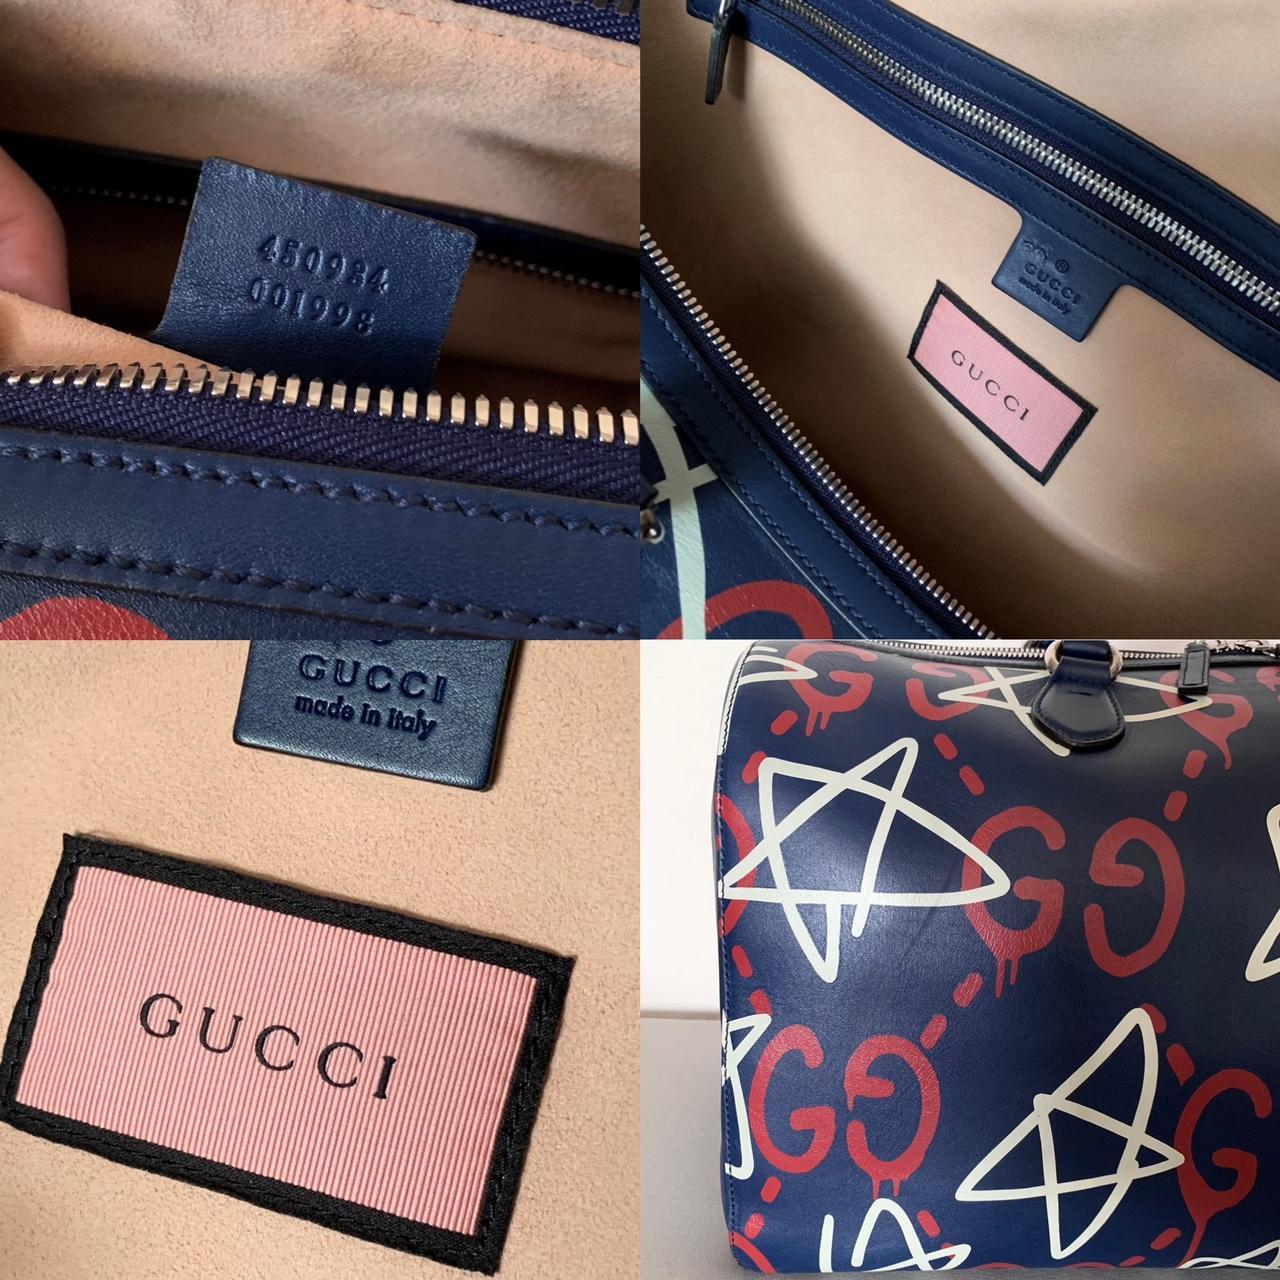 Gucci ghost travel duffel bag. Navy leather with - Depop